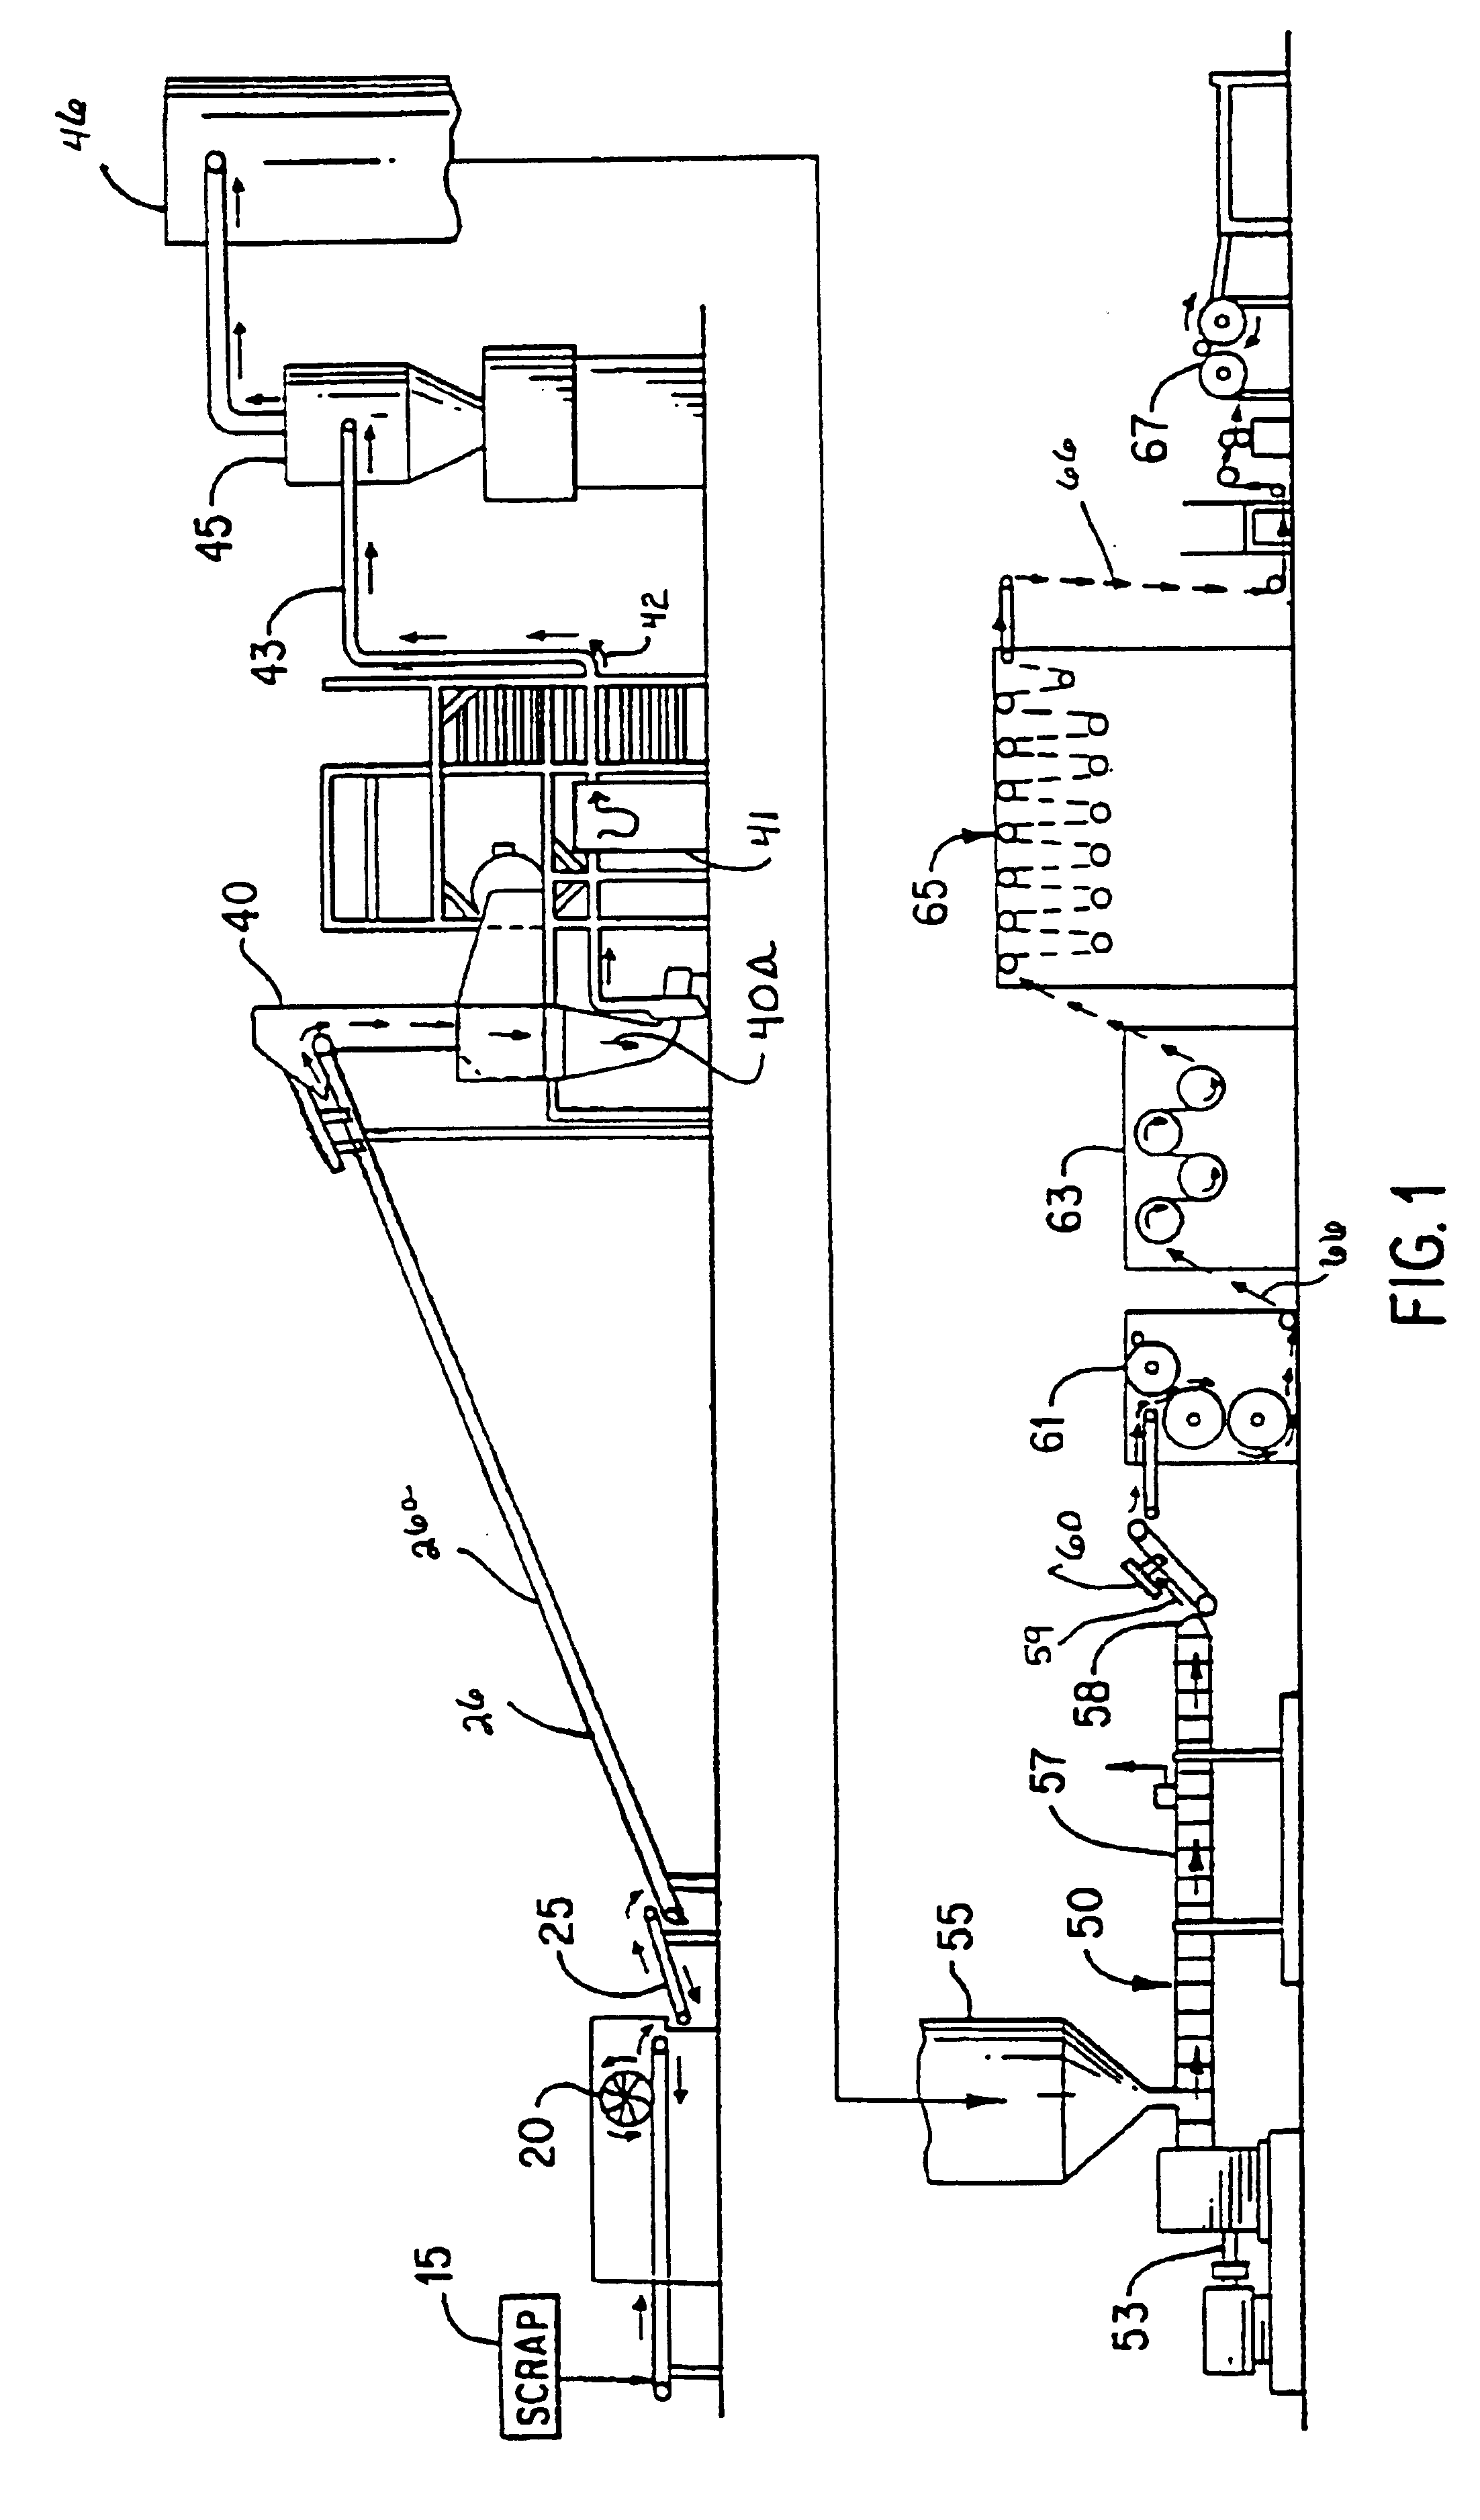 Process for manufacturing a floor covering having a foamed backing formed from recycled polymeric material